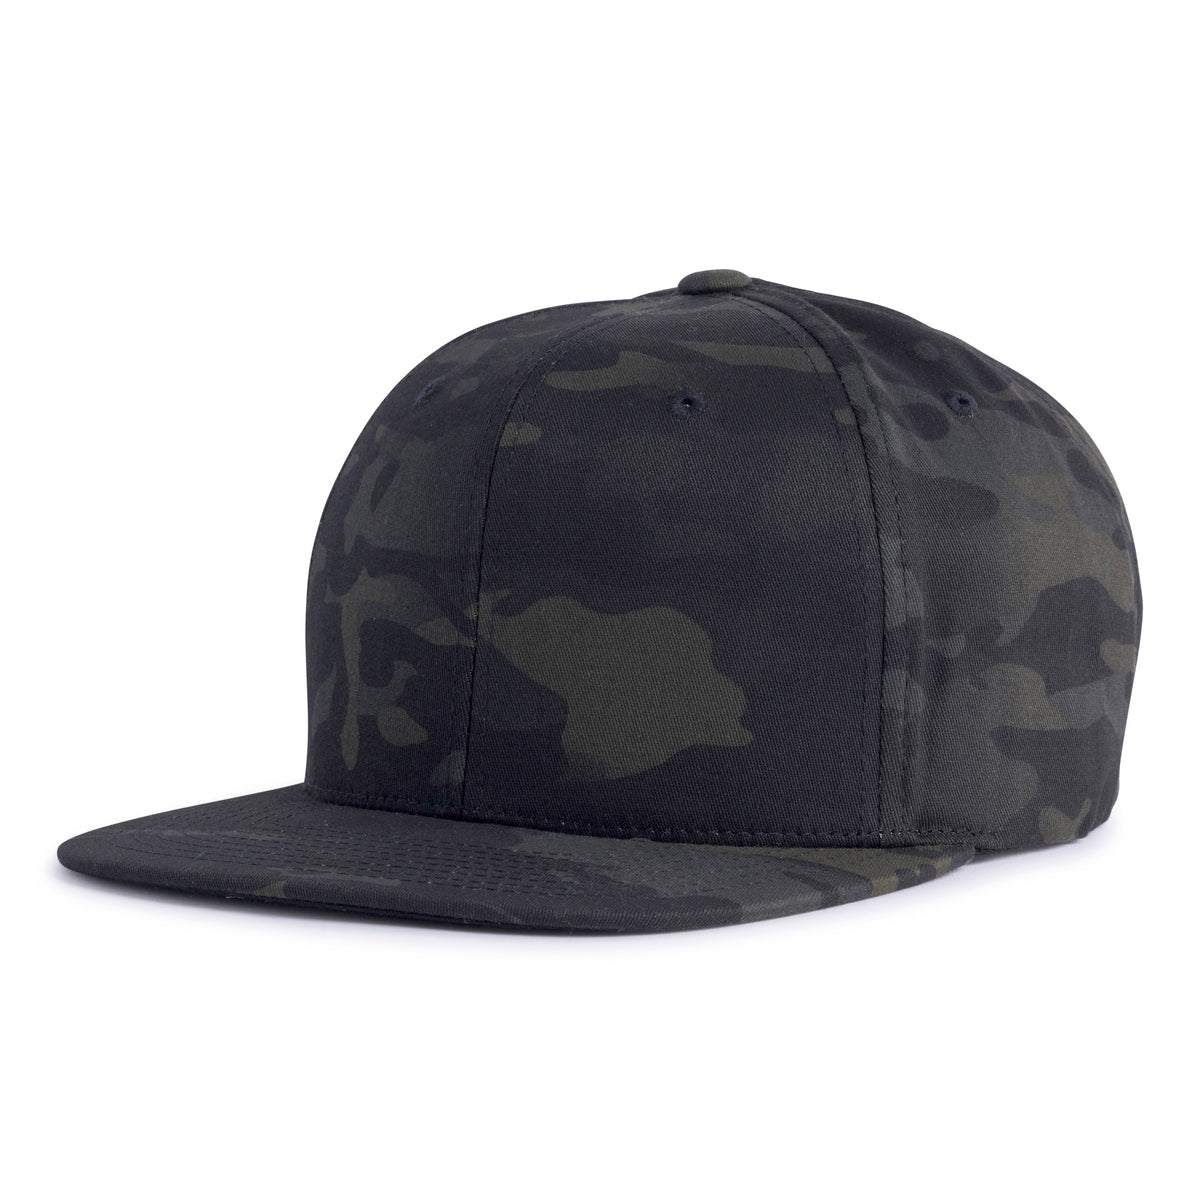 Black and dark green camo flat bill trucker hat with 6-panels, structured mid/high crown, and a snapback closure from Tailgate Hats.